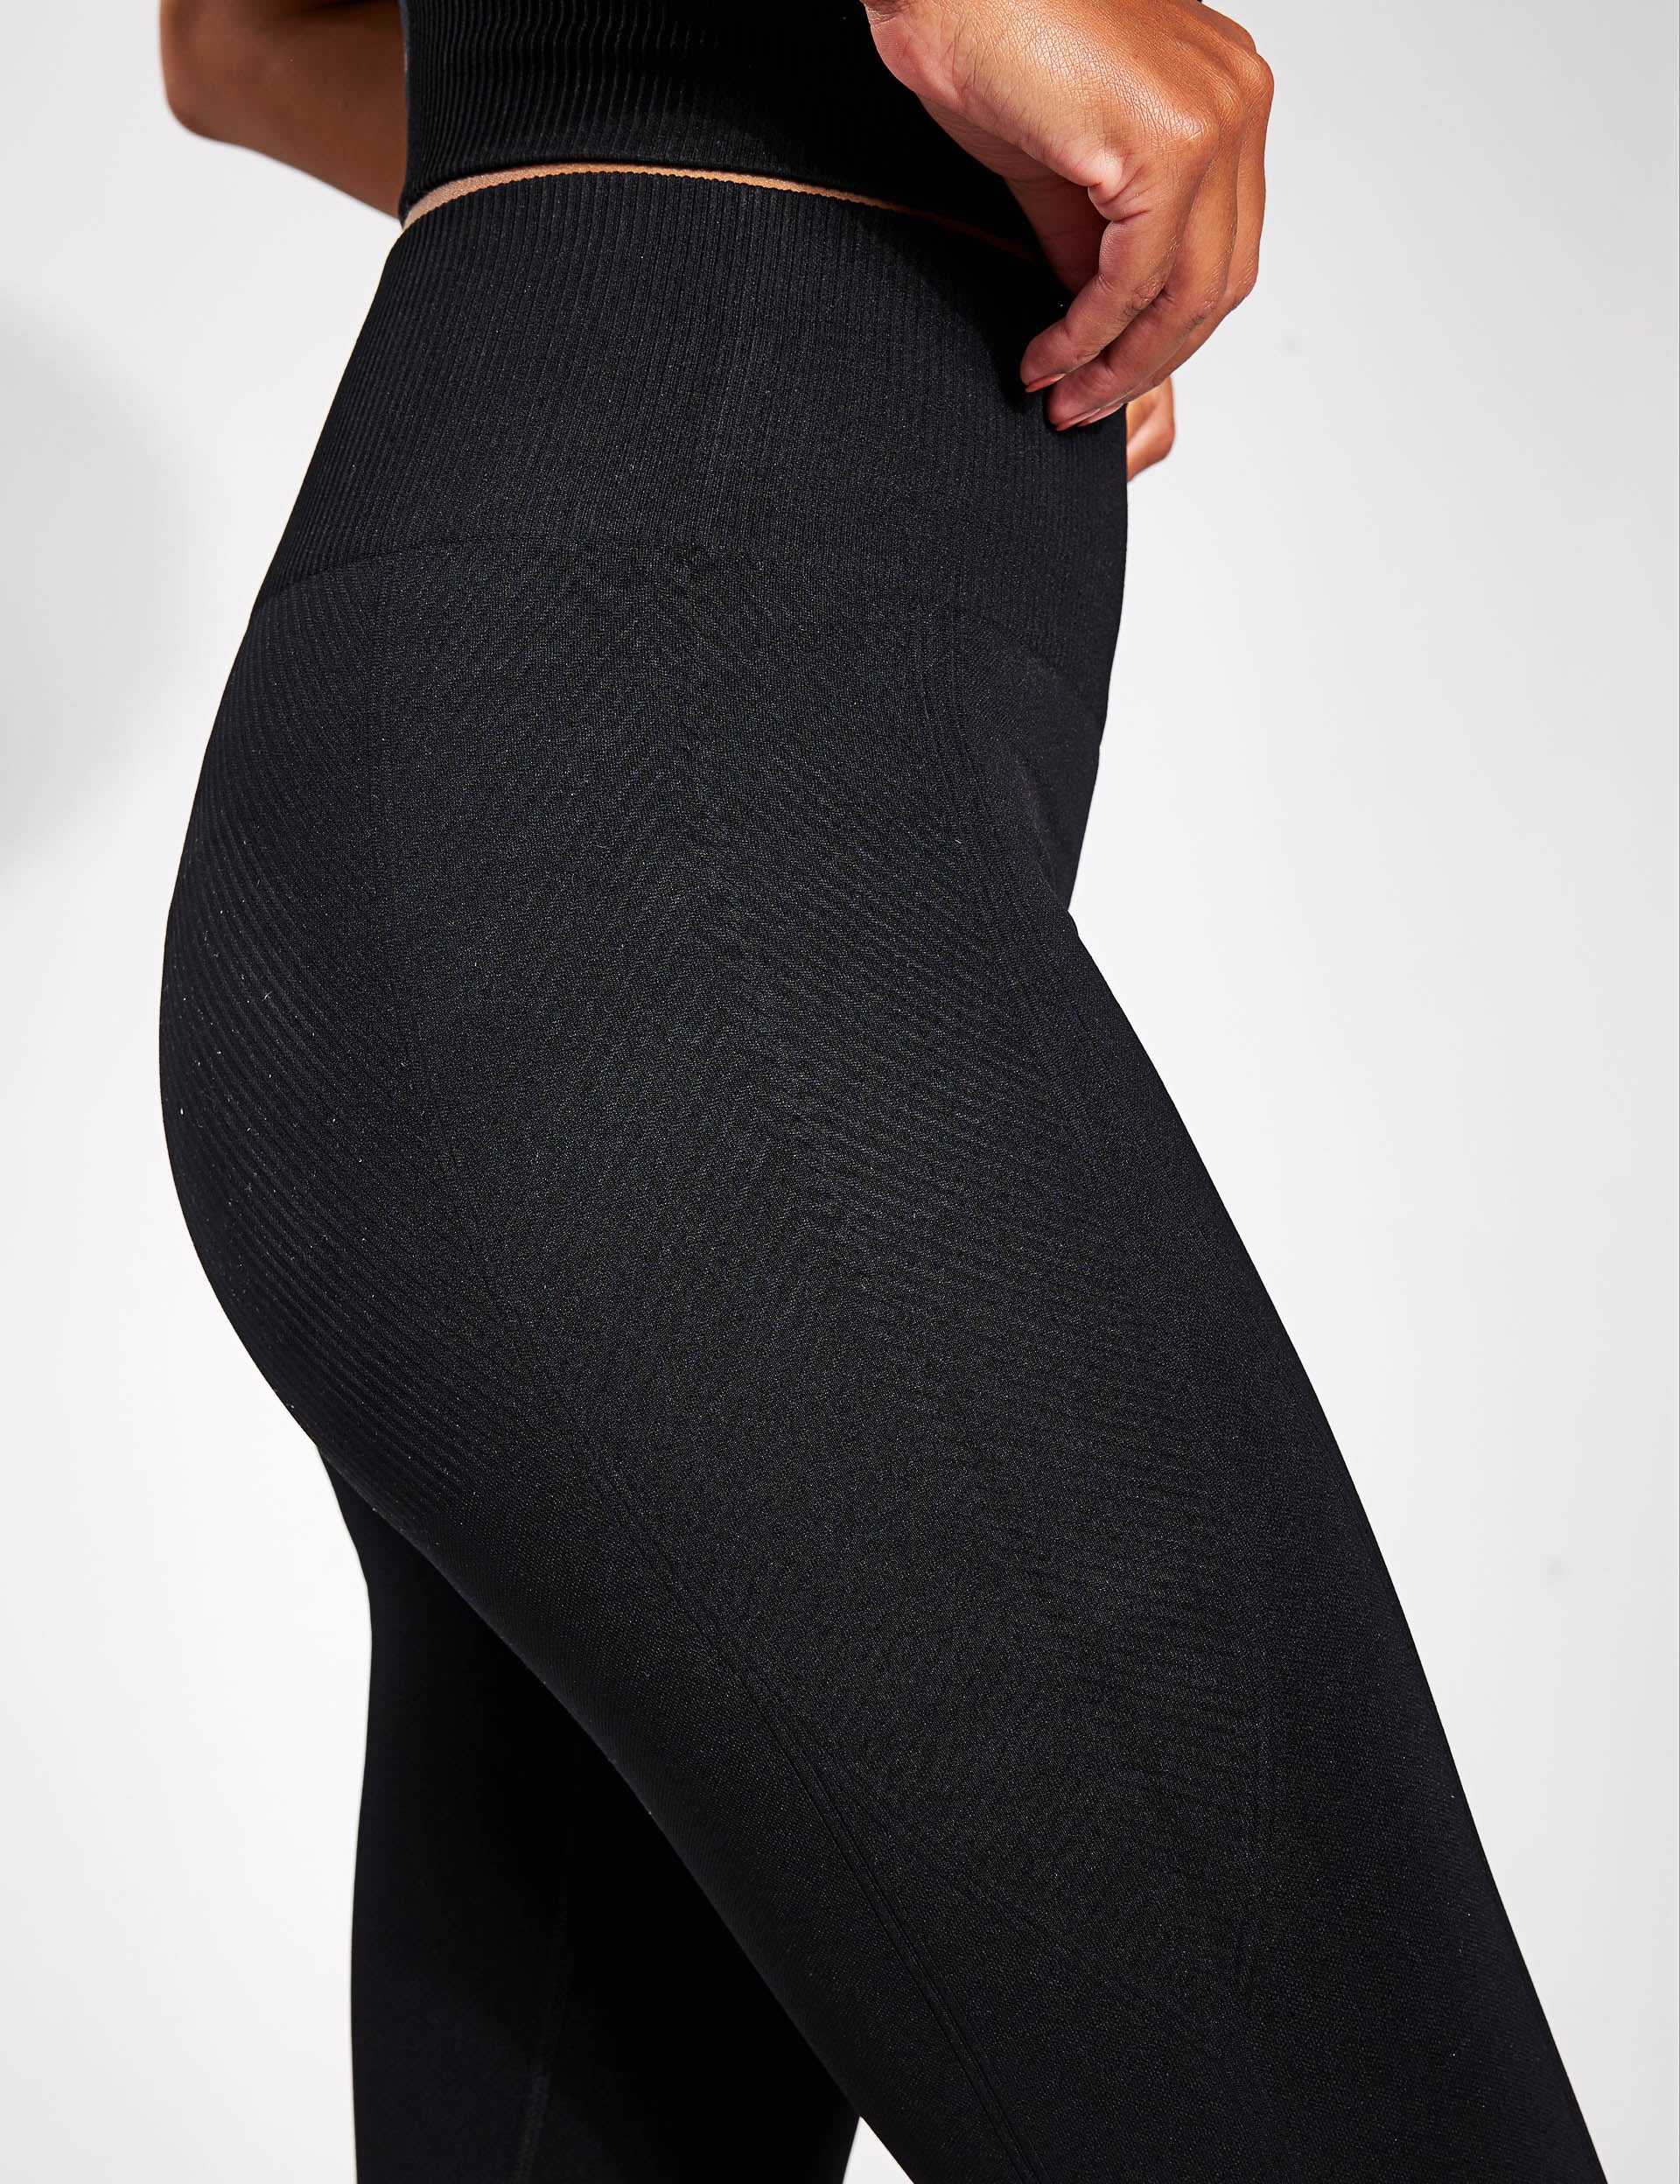 Buy Classic Black Leggings With White Side Stripe Online in India - Etsy